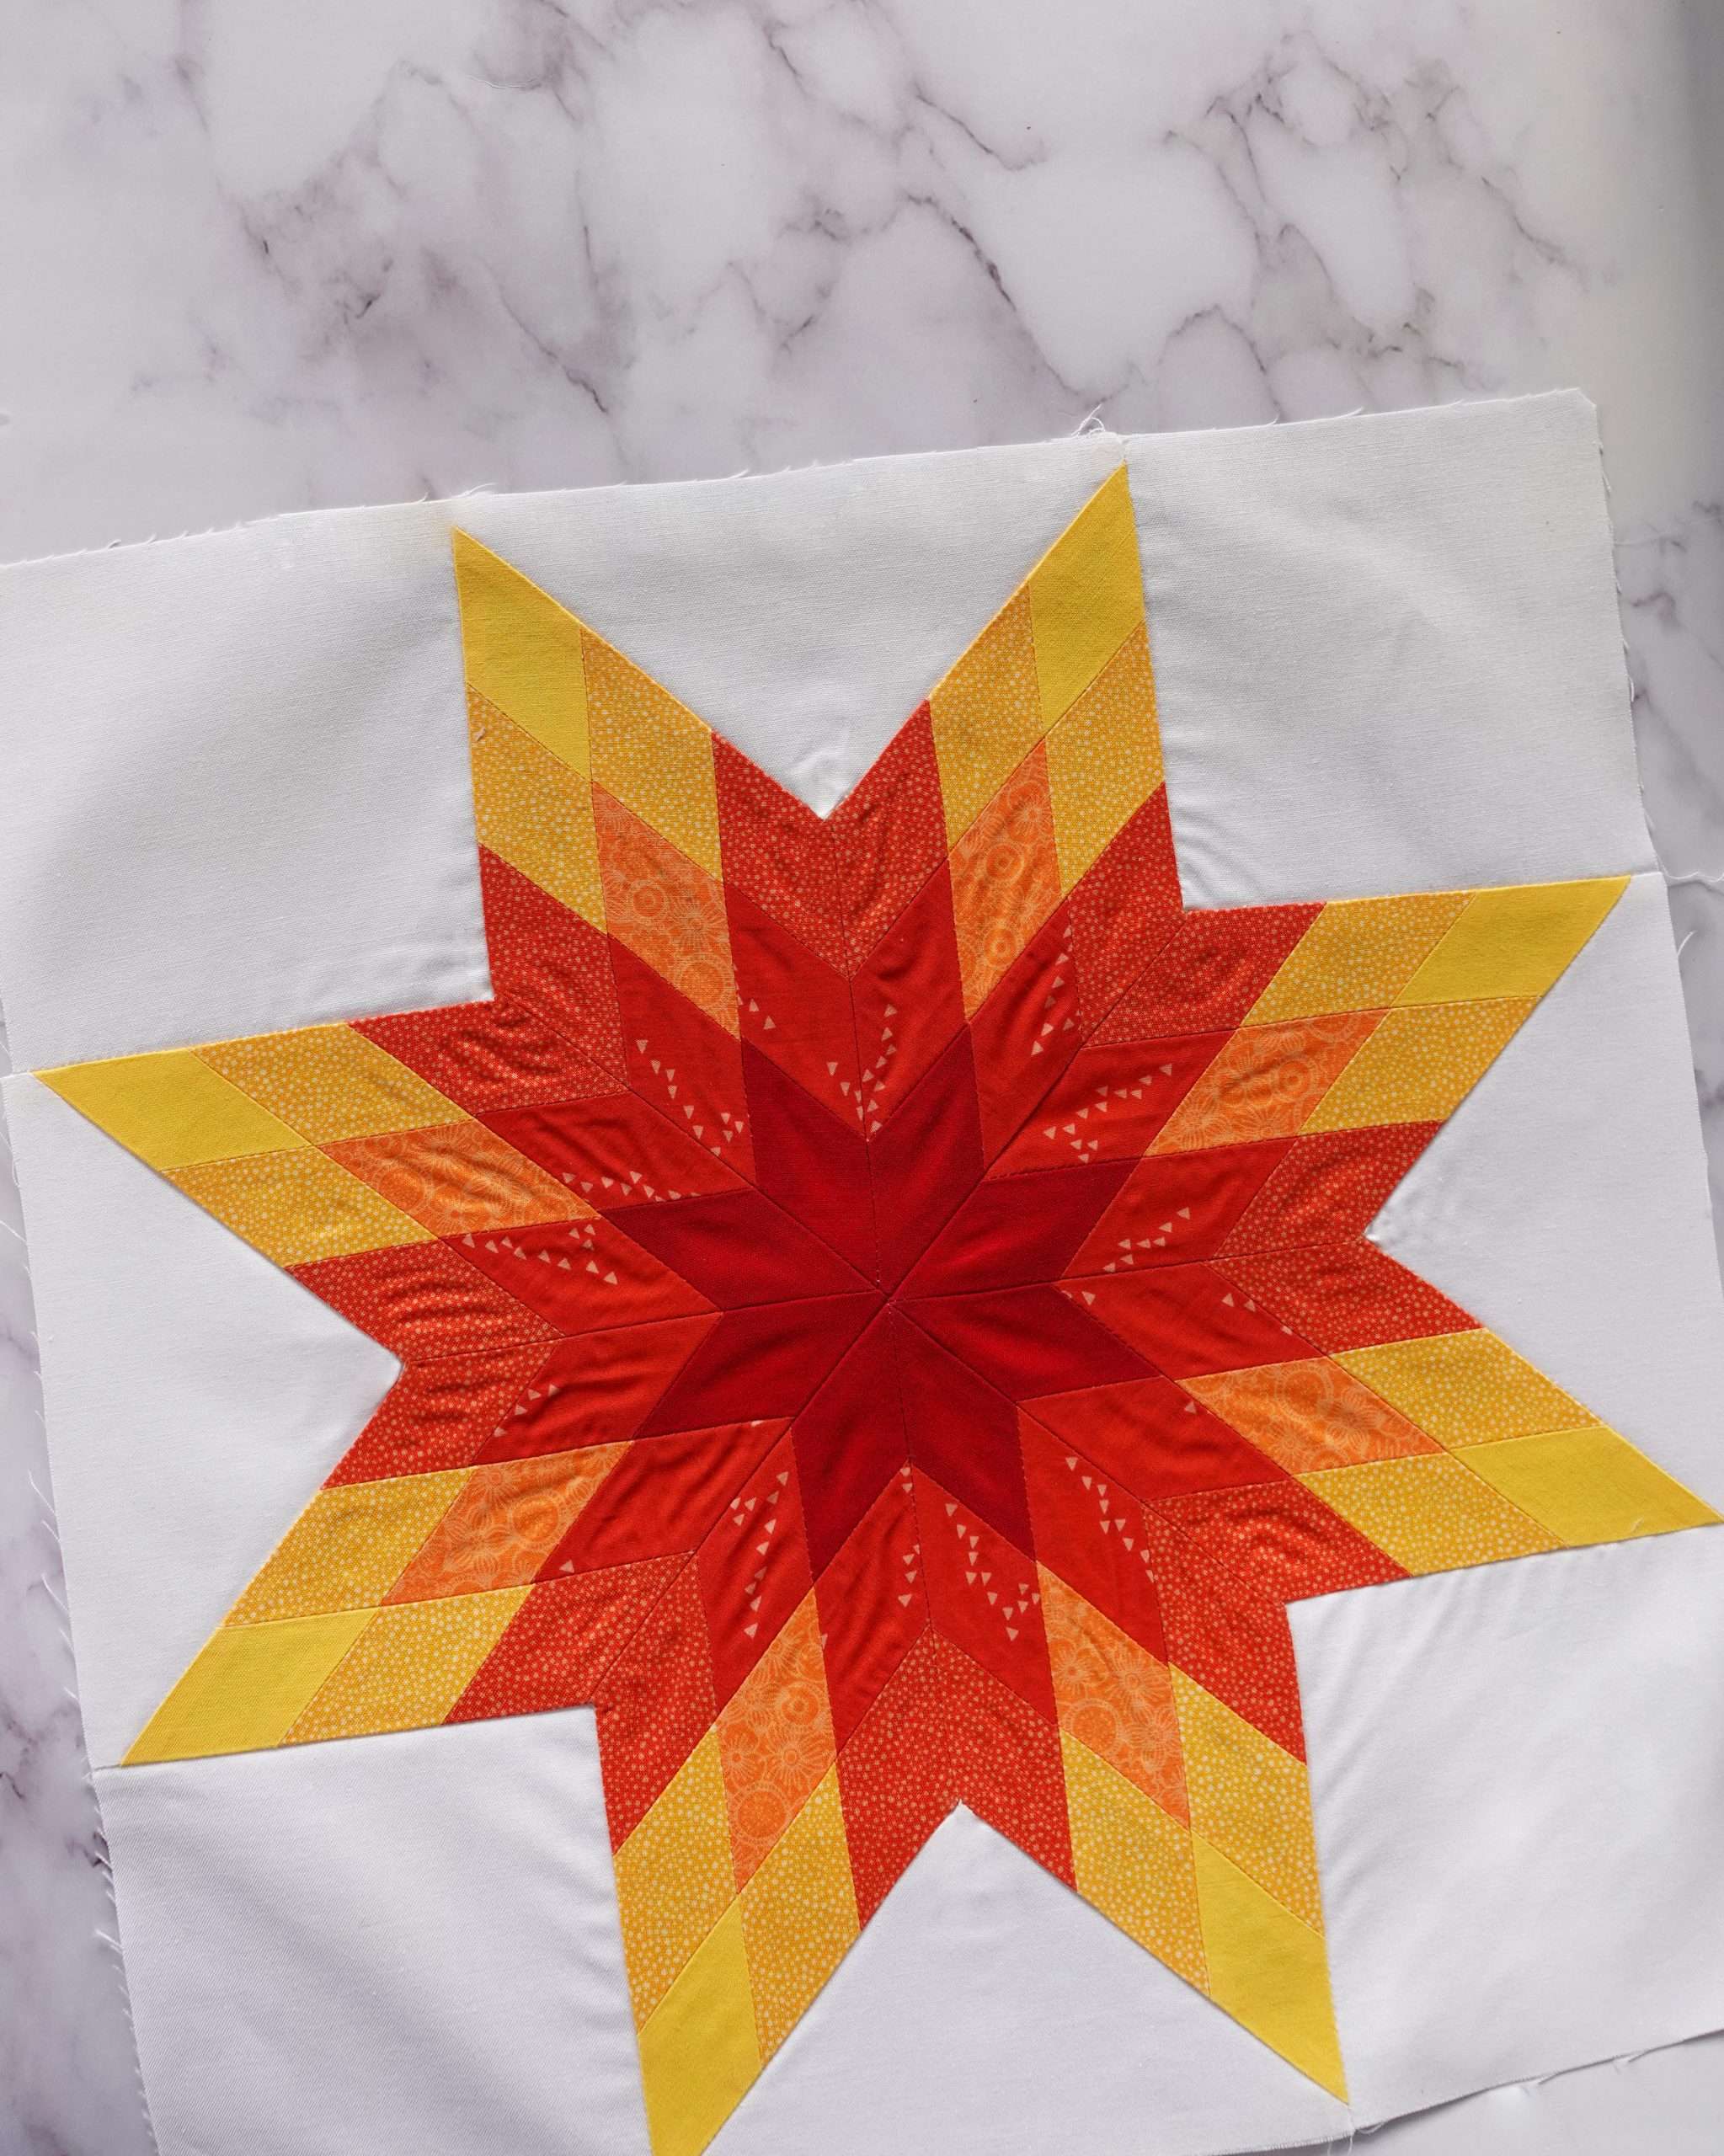 Preparing To Quilt A Star Block